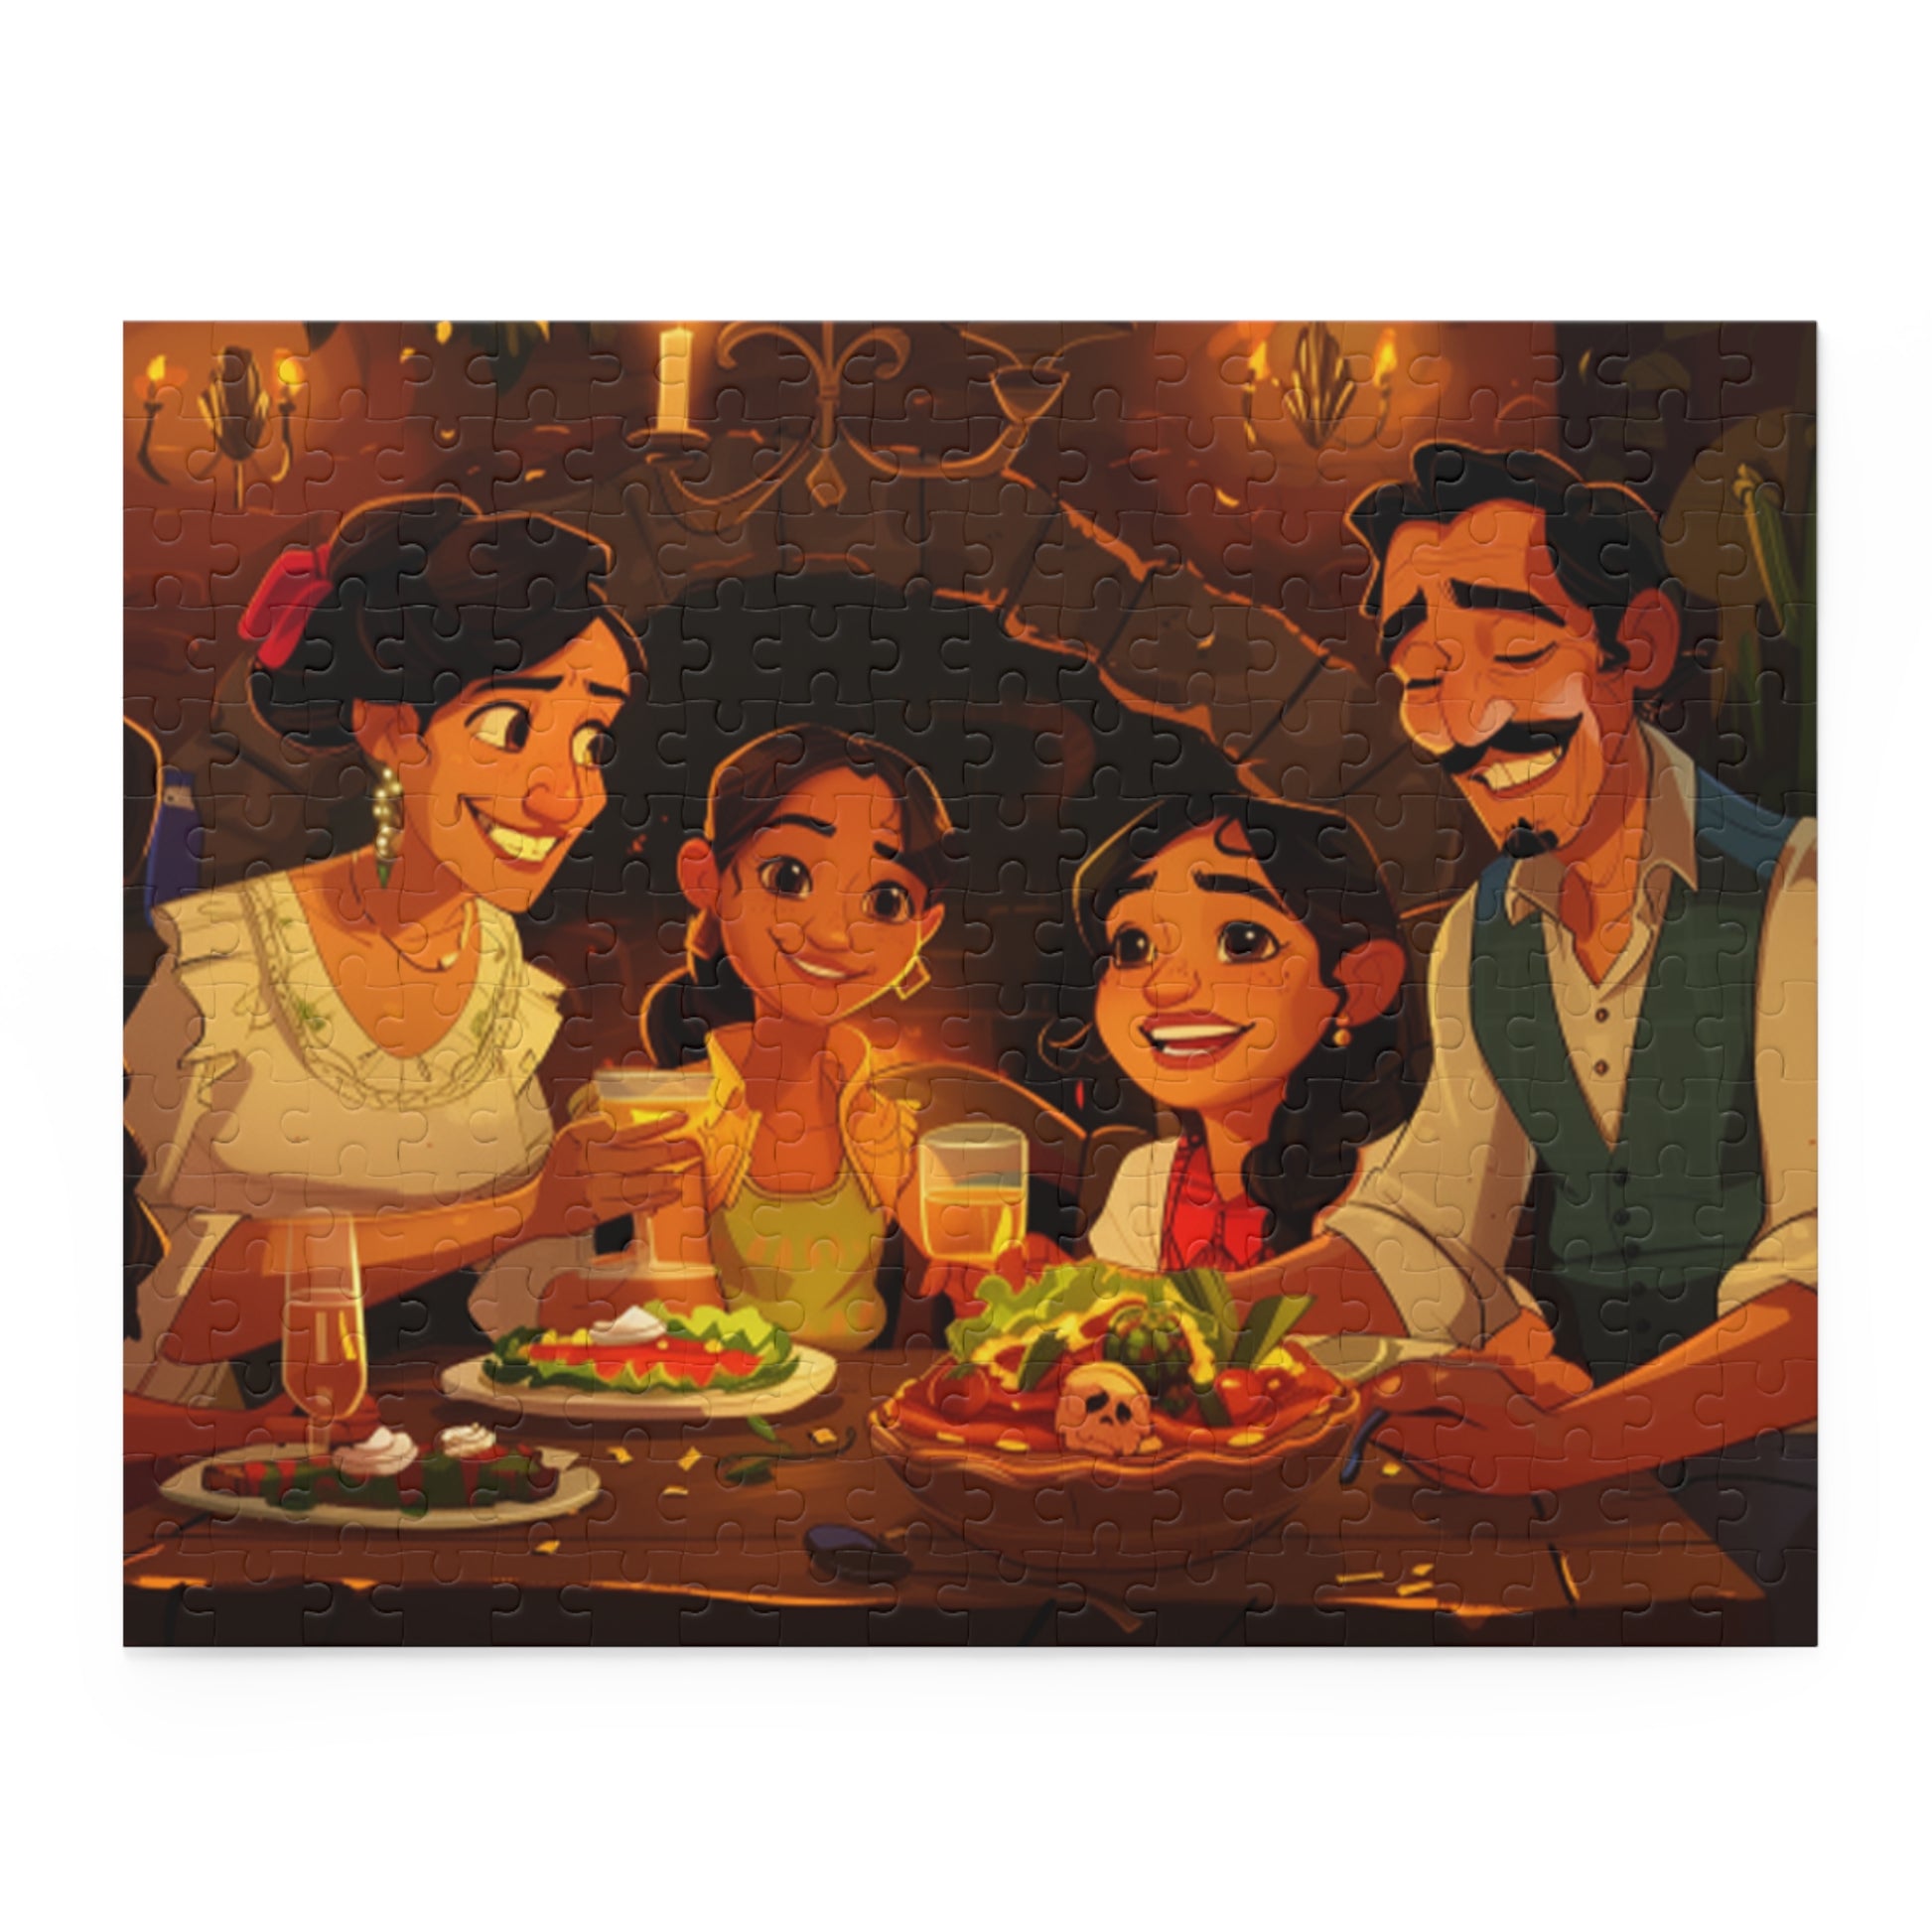 Mexican Lovely Family Dinner Retro Art Jigsaw Puzzle Adult Birthday Business Jigsaw Puzzle Gift for Him Funny Humorous Indoor Outdoor Game Gift For Her Online-3